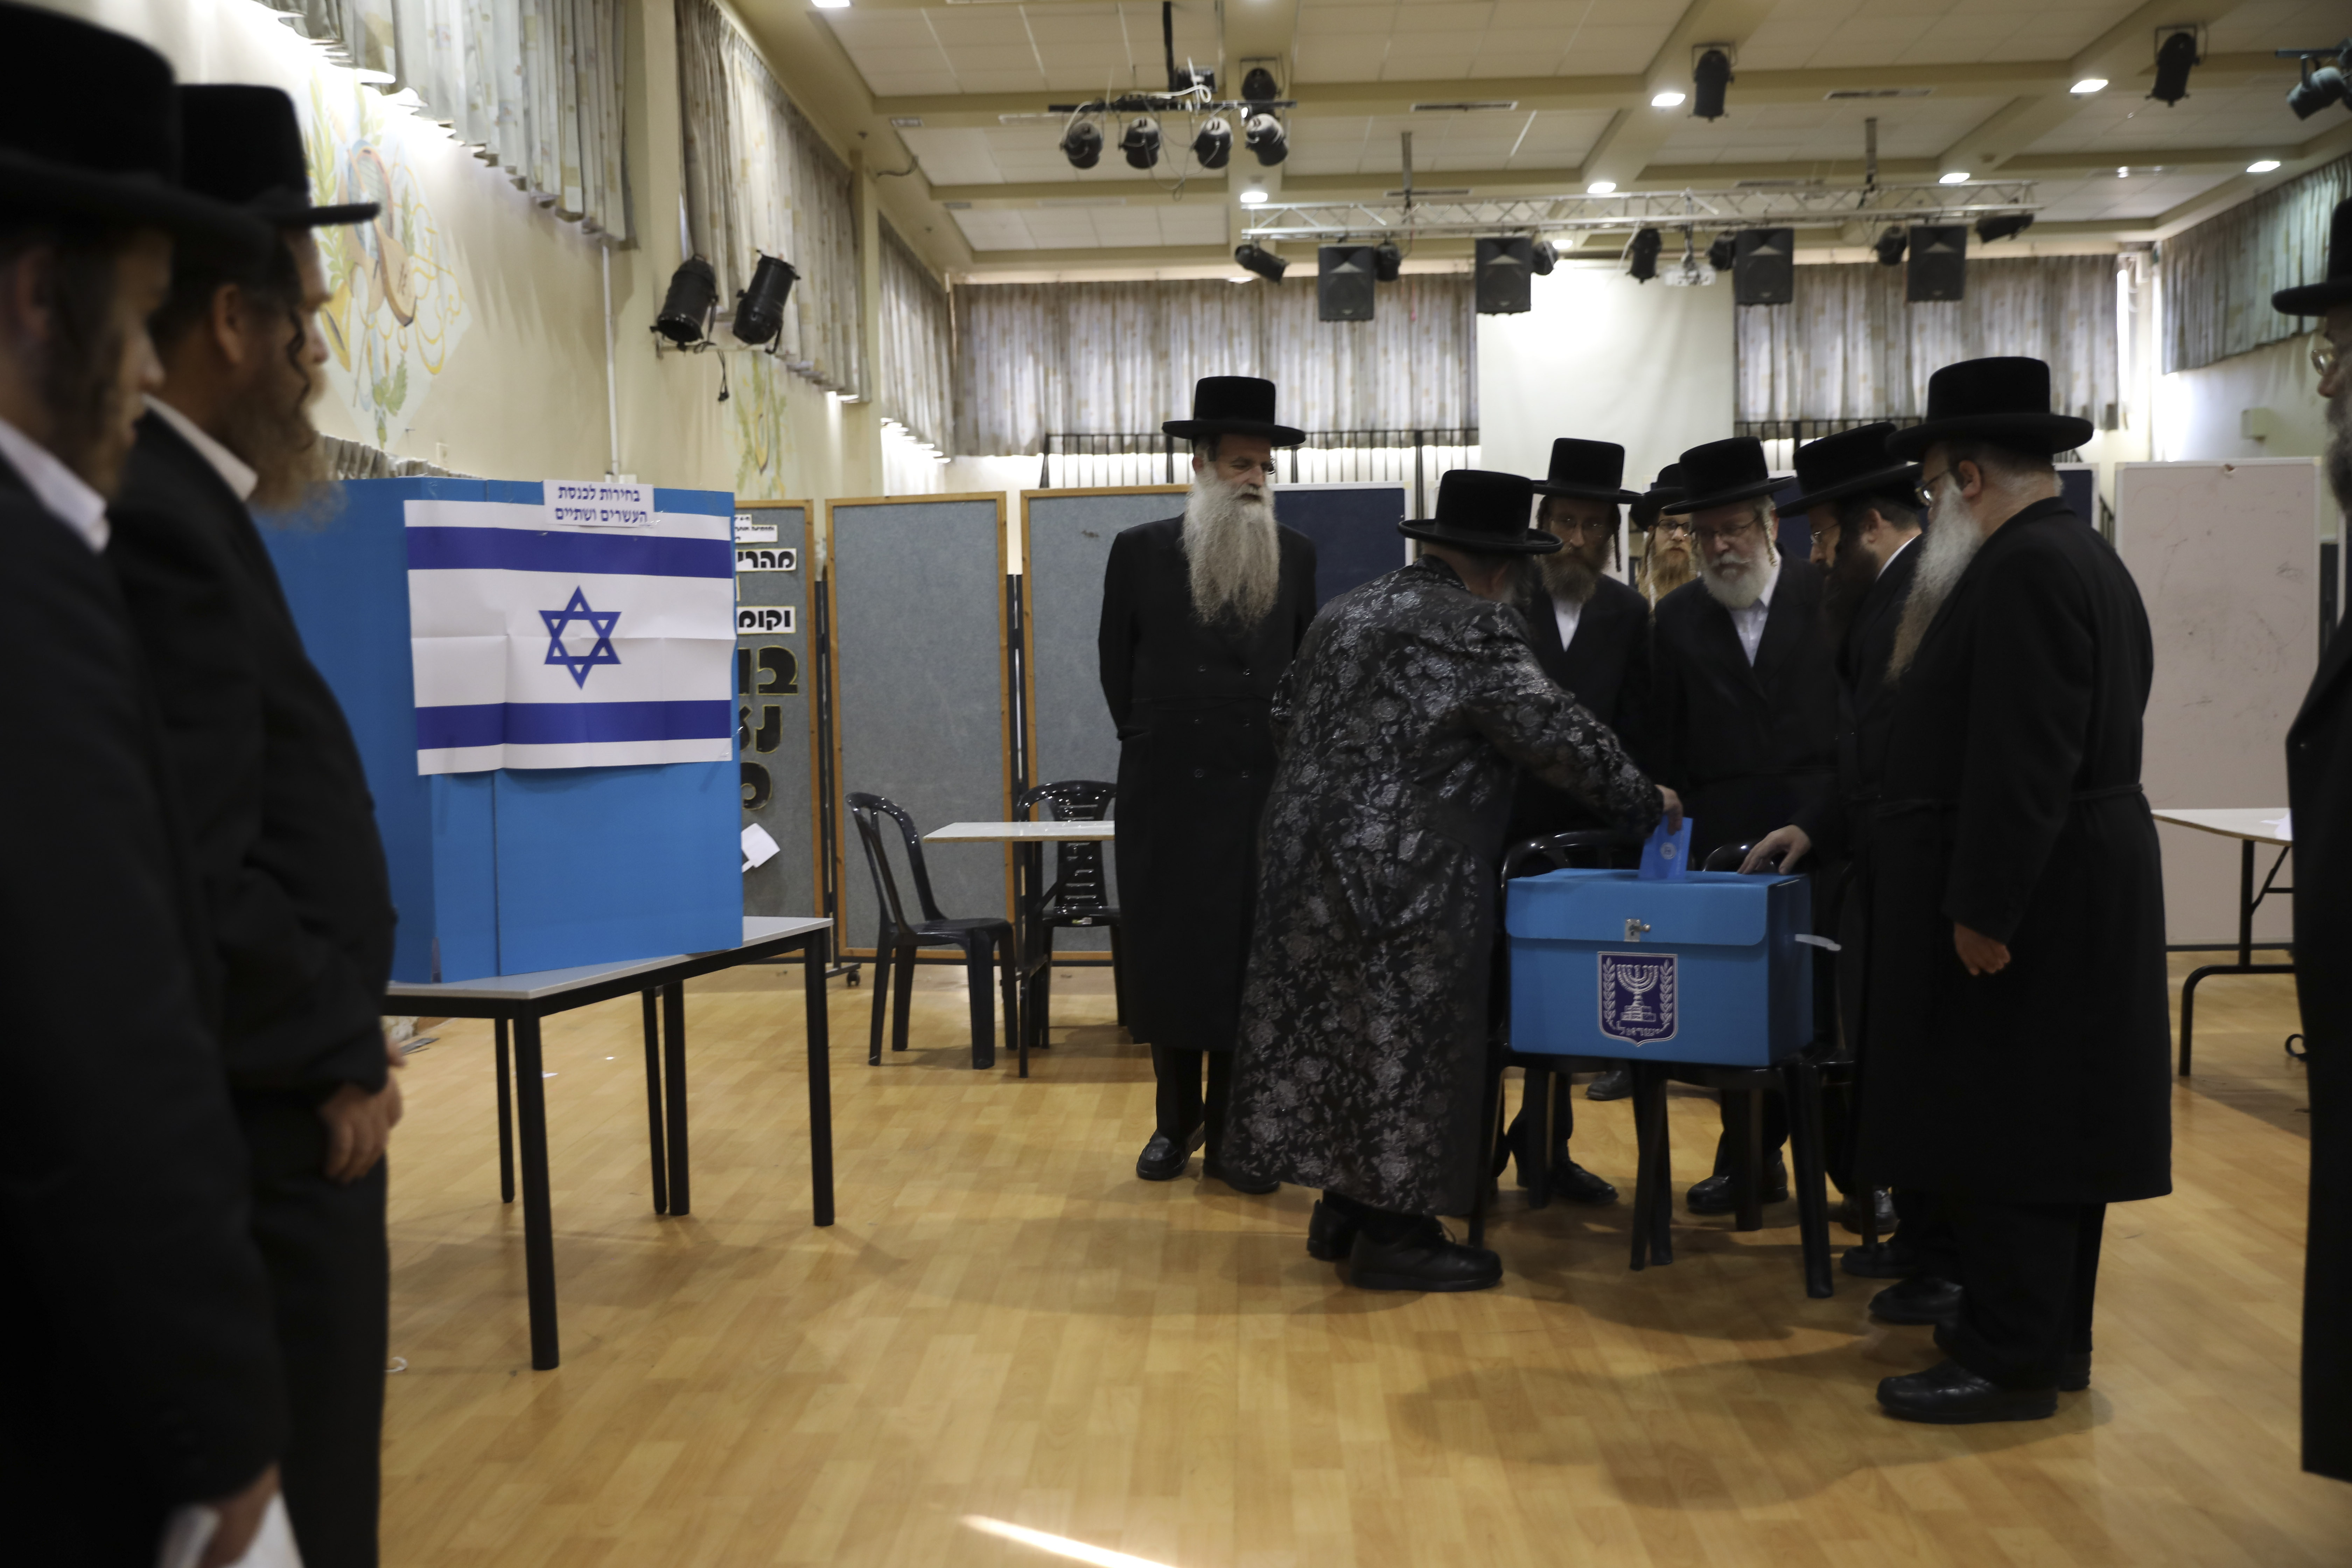 Ultra orthodox Jews watch Rabbi Israel Hager vote in Bnei Brak, Israel, Tuesday, Sept. 17, 2019. Israelis began voting Tuesday in an unprecedented repeat election that will decide whether longtime Prime Minister Benjamin Netanyahu stays in power despite a looming indictment on corruption charges. (AP Photo/Oded Balilty)